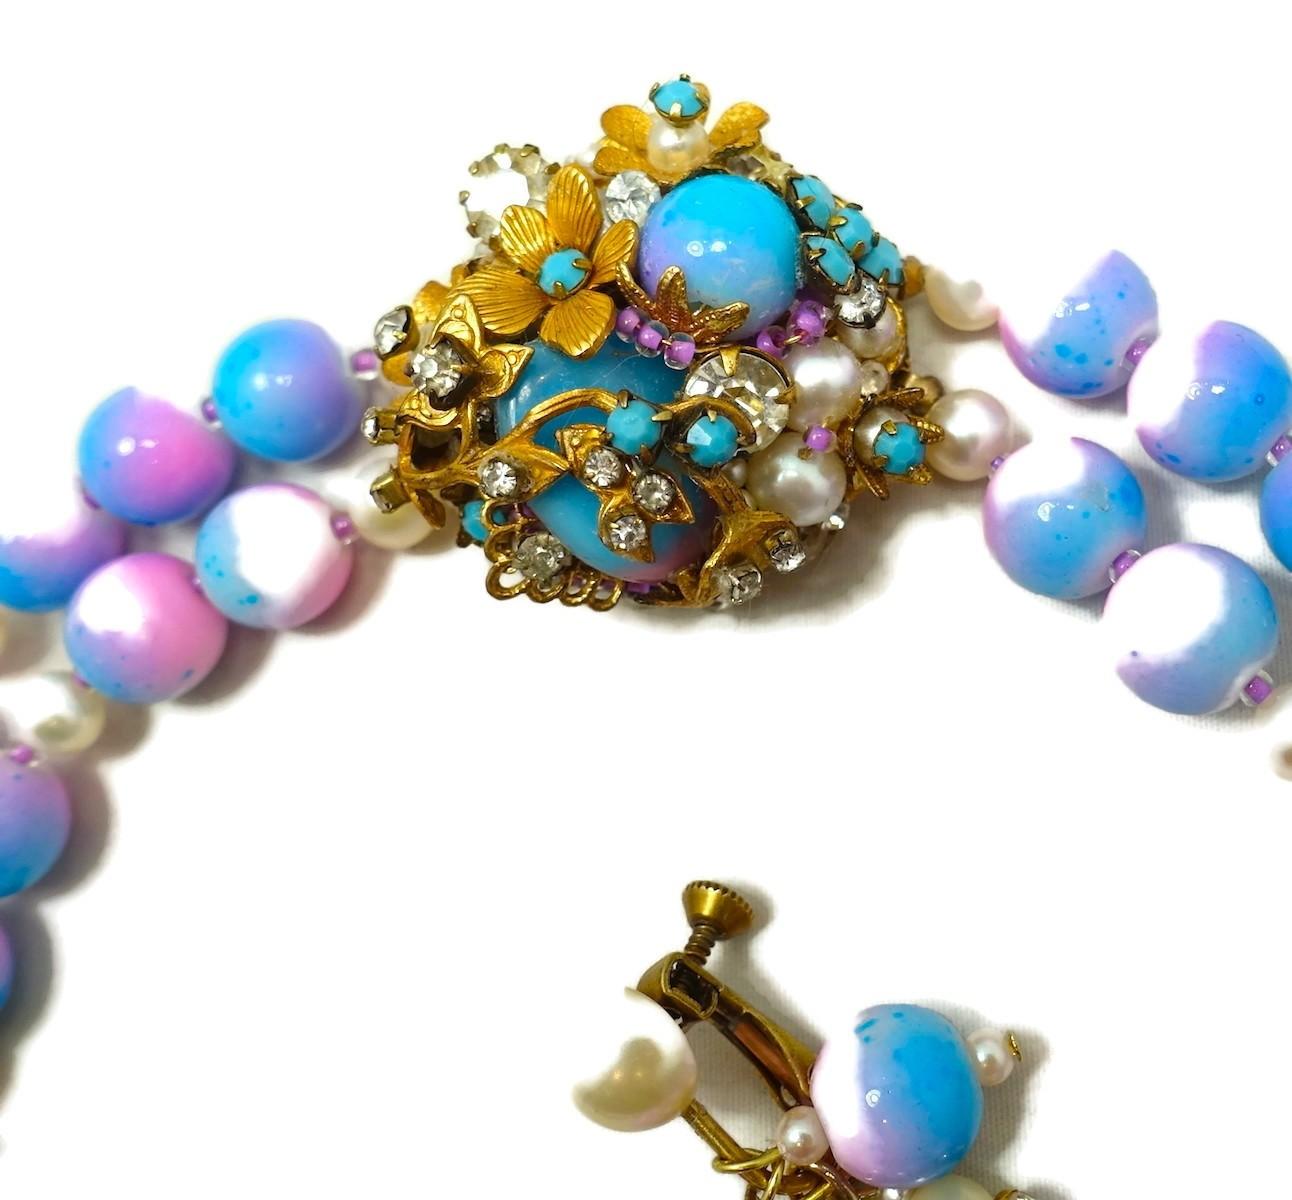 This vintage early Miriam Haskell set has pink and blue glass beads with faux pearls and crystal rhondells in a gold tone setting.  In excellent condition, the necklace measures 18-1/2” long. Each bead is 5/16” wide. The slide in clasp has a round